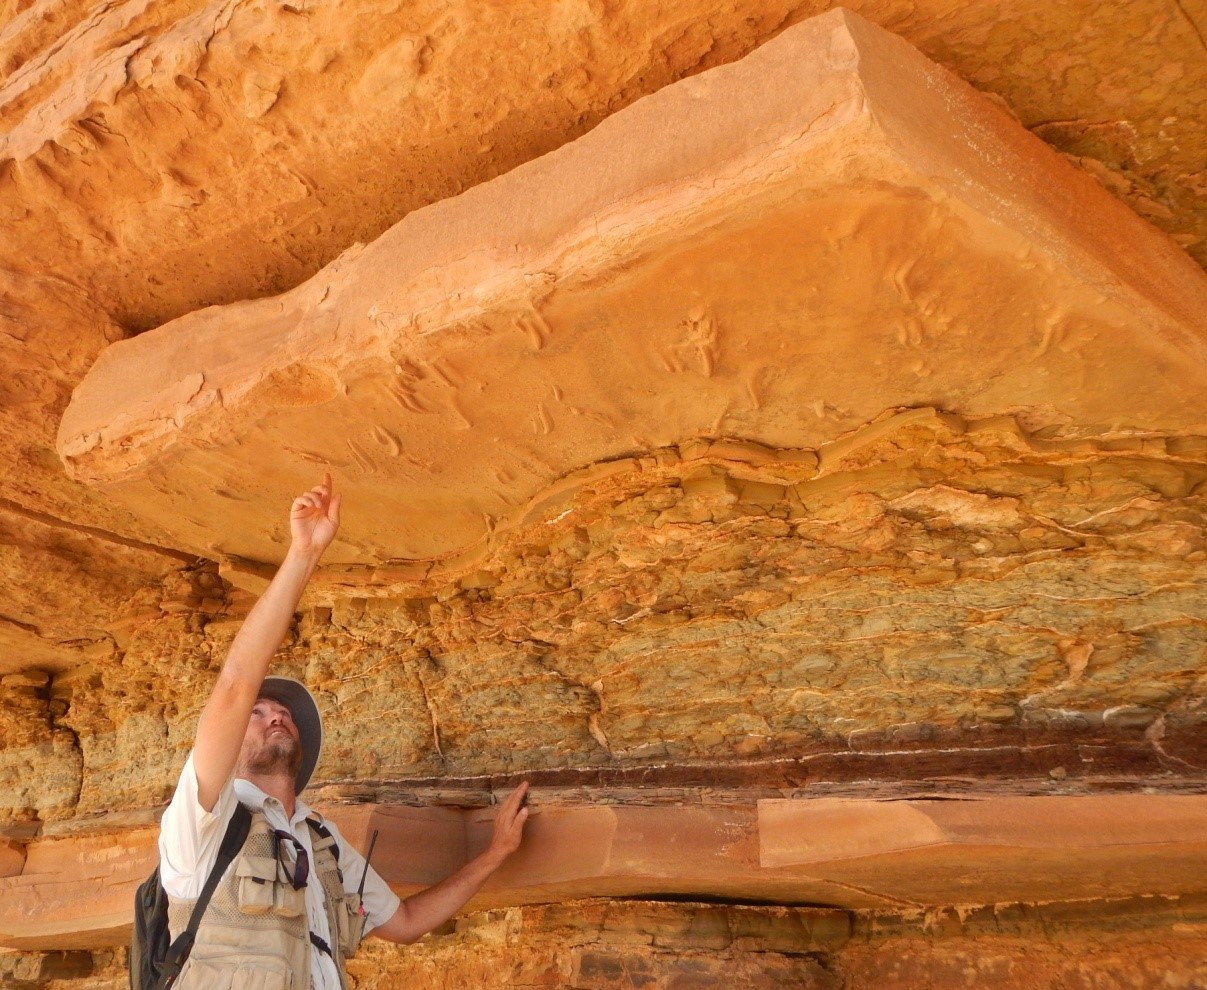 photo of a person pointing to marks on an overhead slab of rock